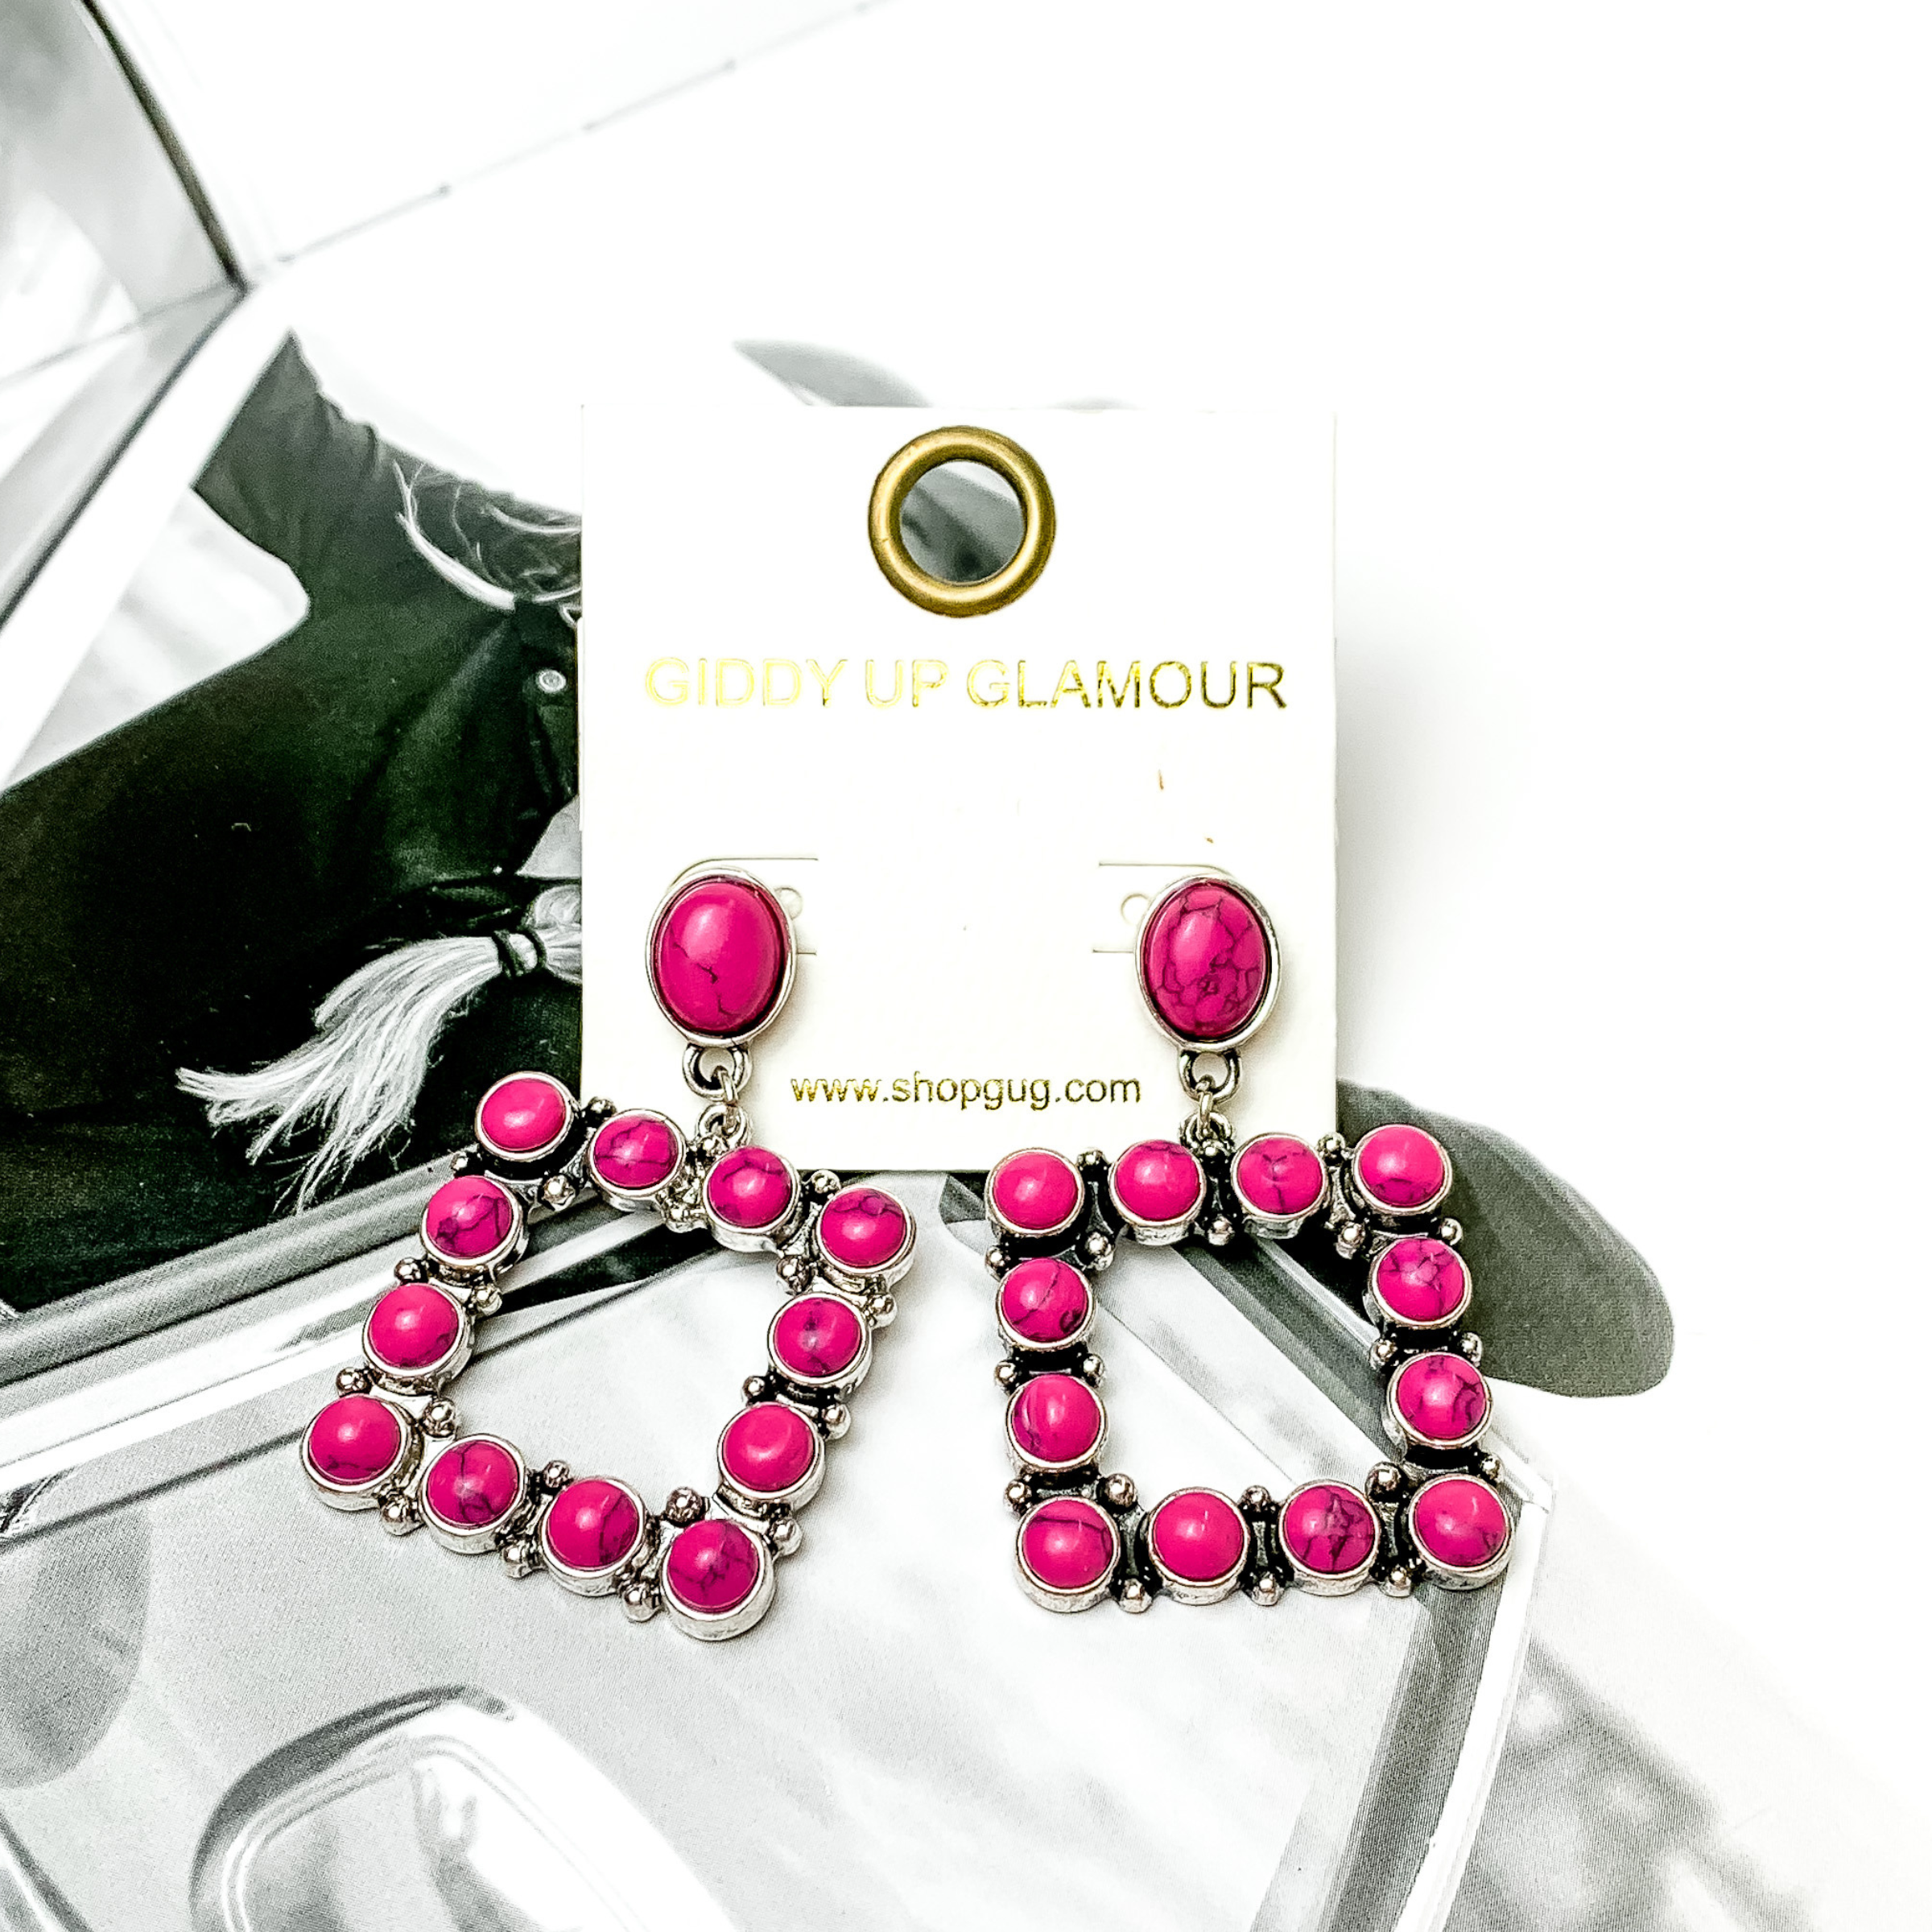 Open square drop earrings with fuchsia pink stones. These earrings are pictured on a black and white picture. 